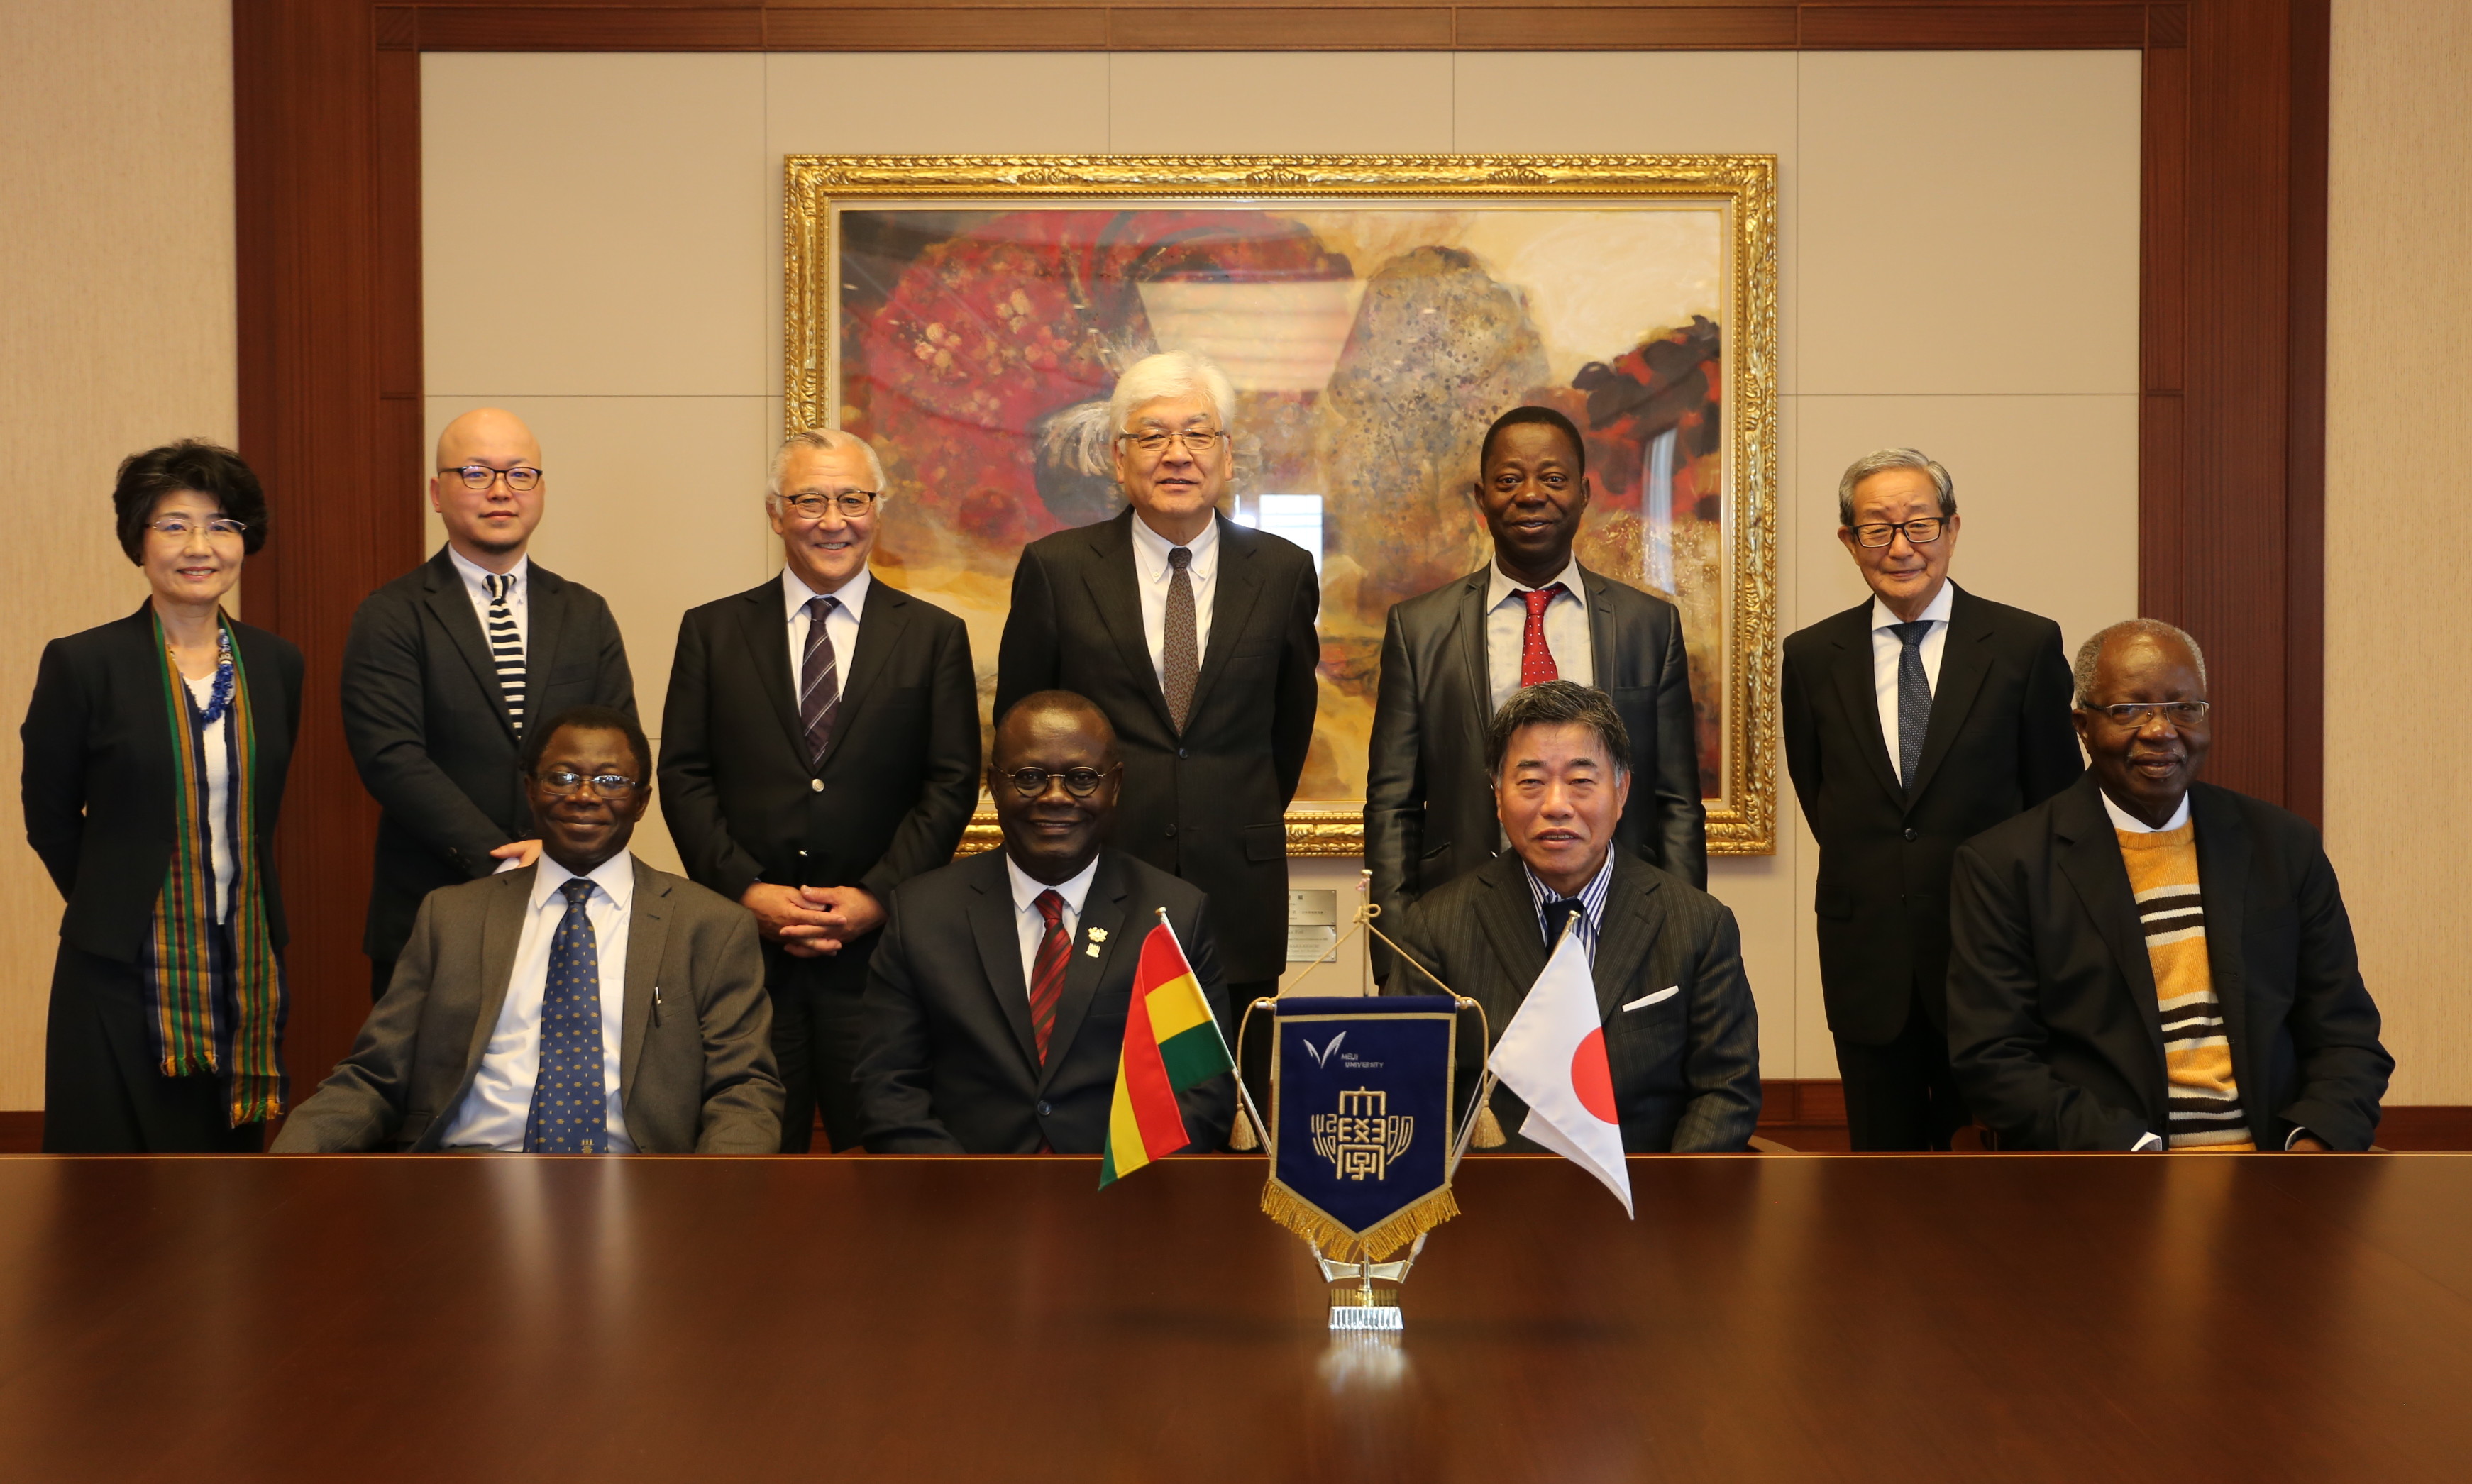 We took the first step toward long-term friendly relations (center left: Professor Owusu, Vice-Chancellor)